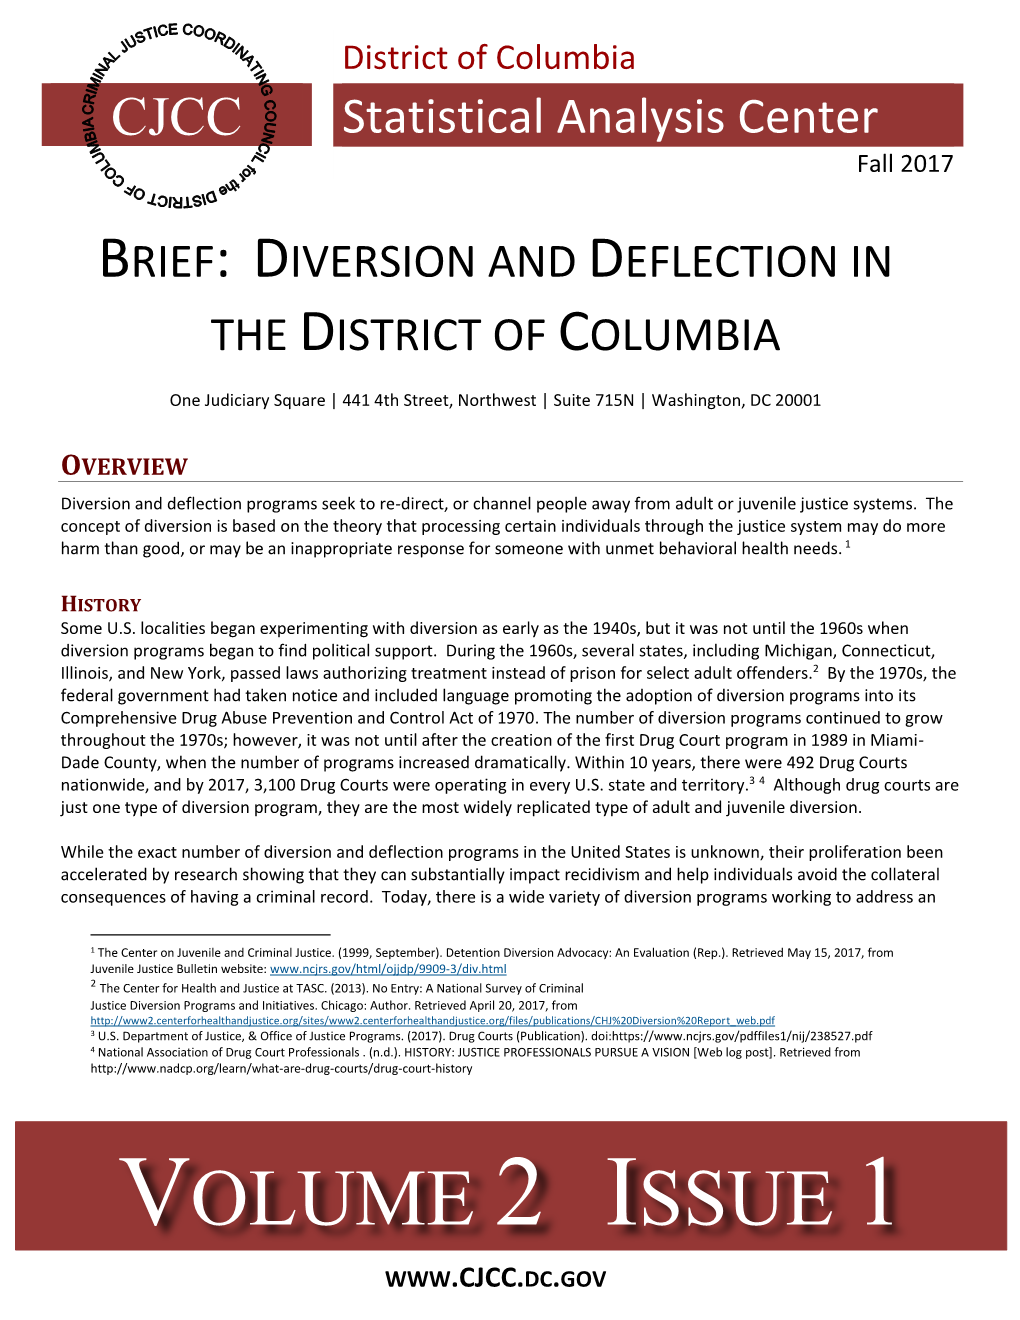 DIVERSION and DEFLECTION in the DISTRICT of COLUMBIA.Pdf